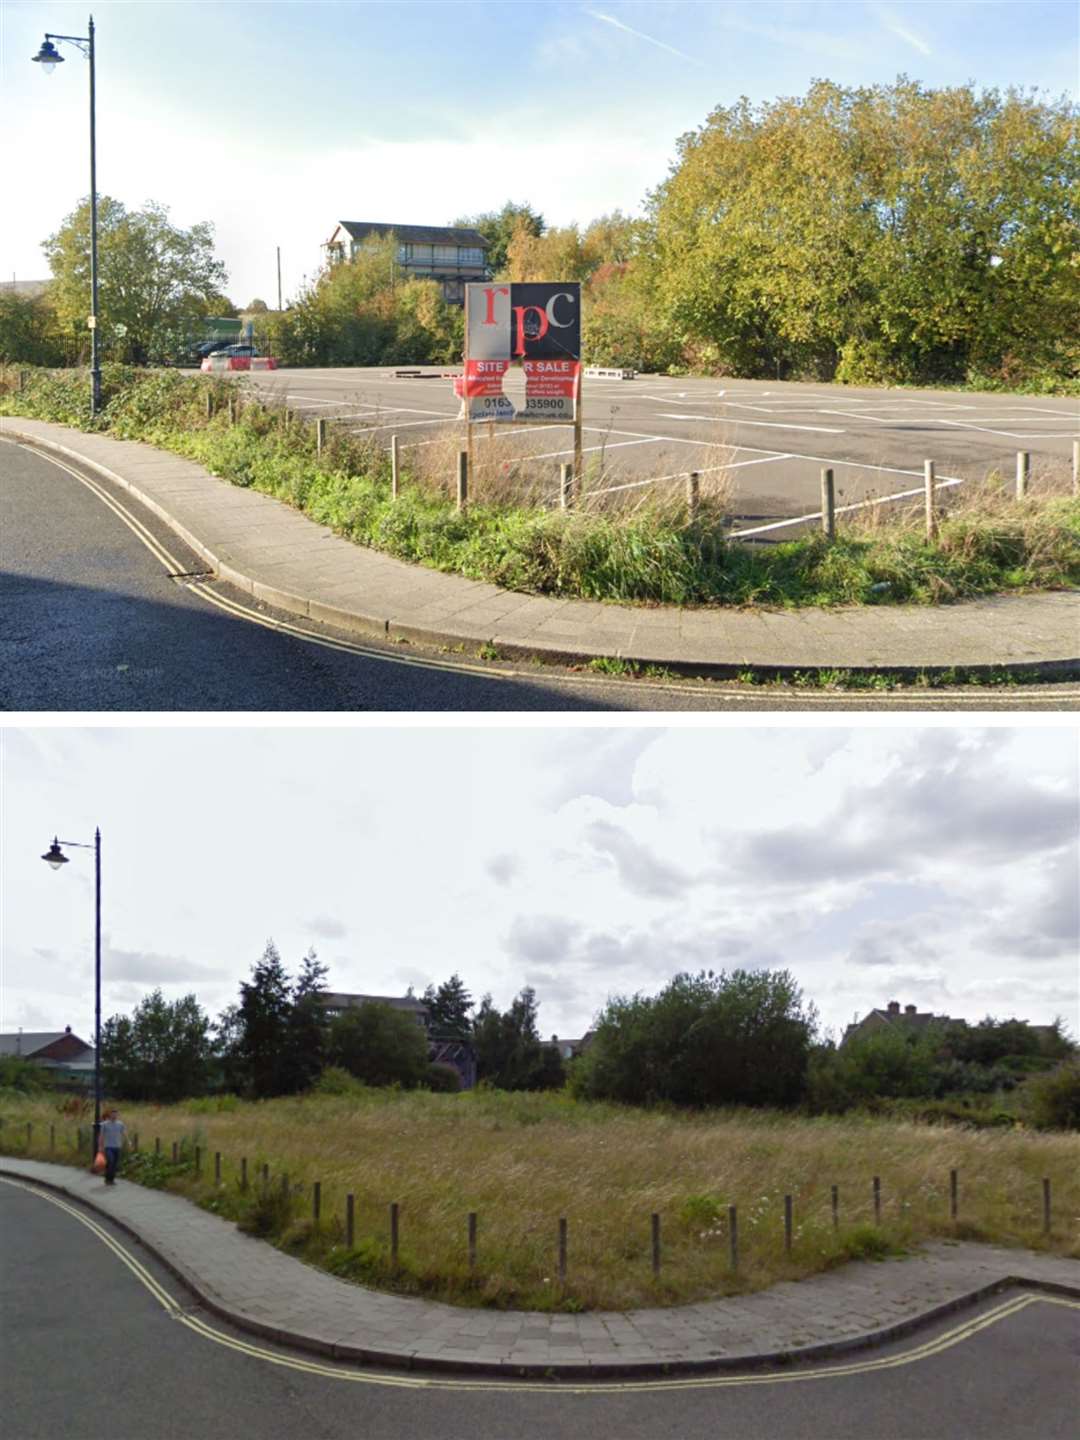 Station Road West car park today is often used as a makeshift skatepark (top) and the car park as it was in 2009. Picture: Google